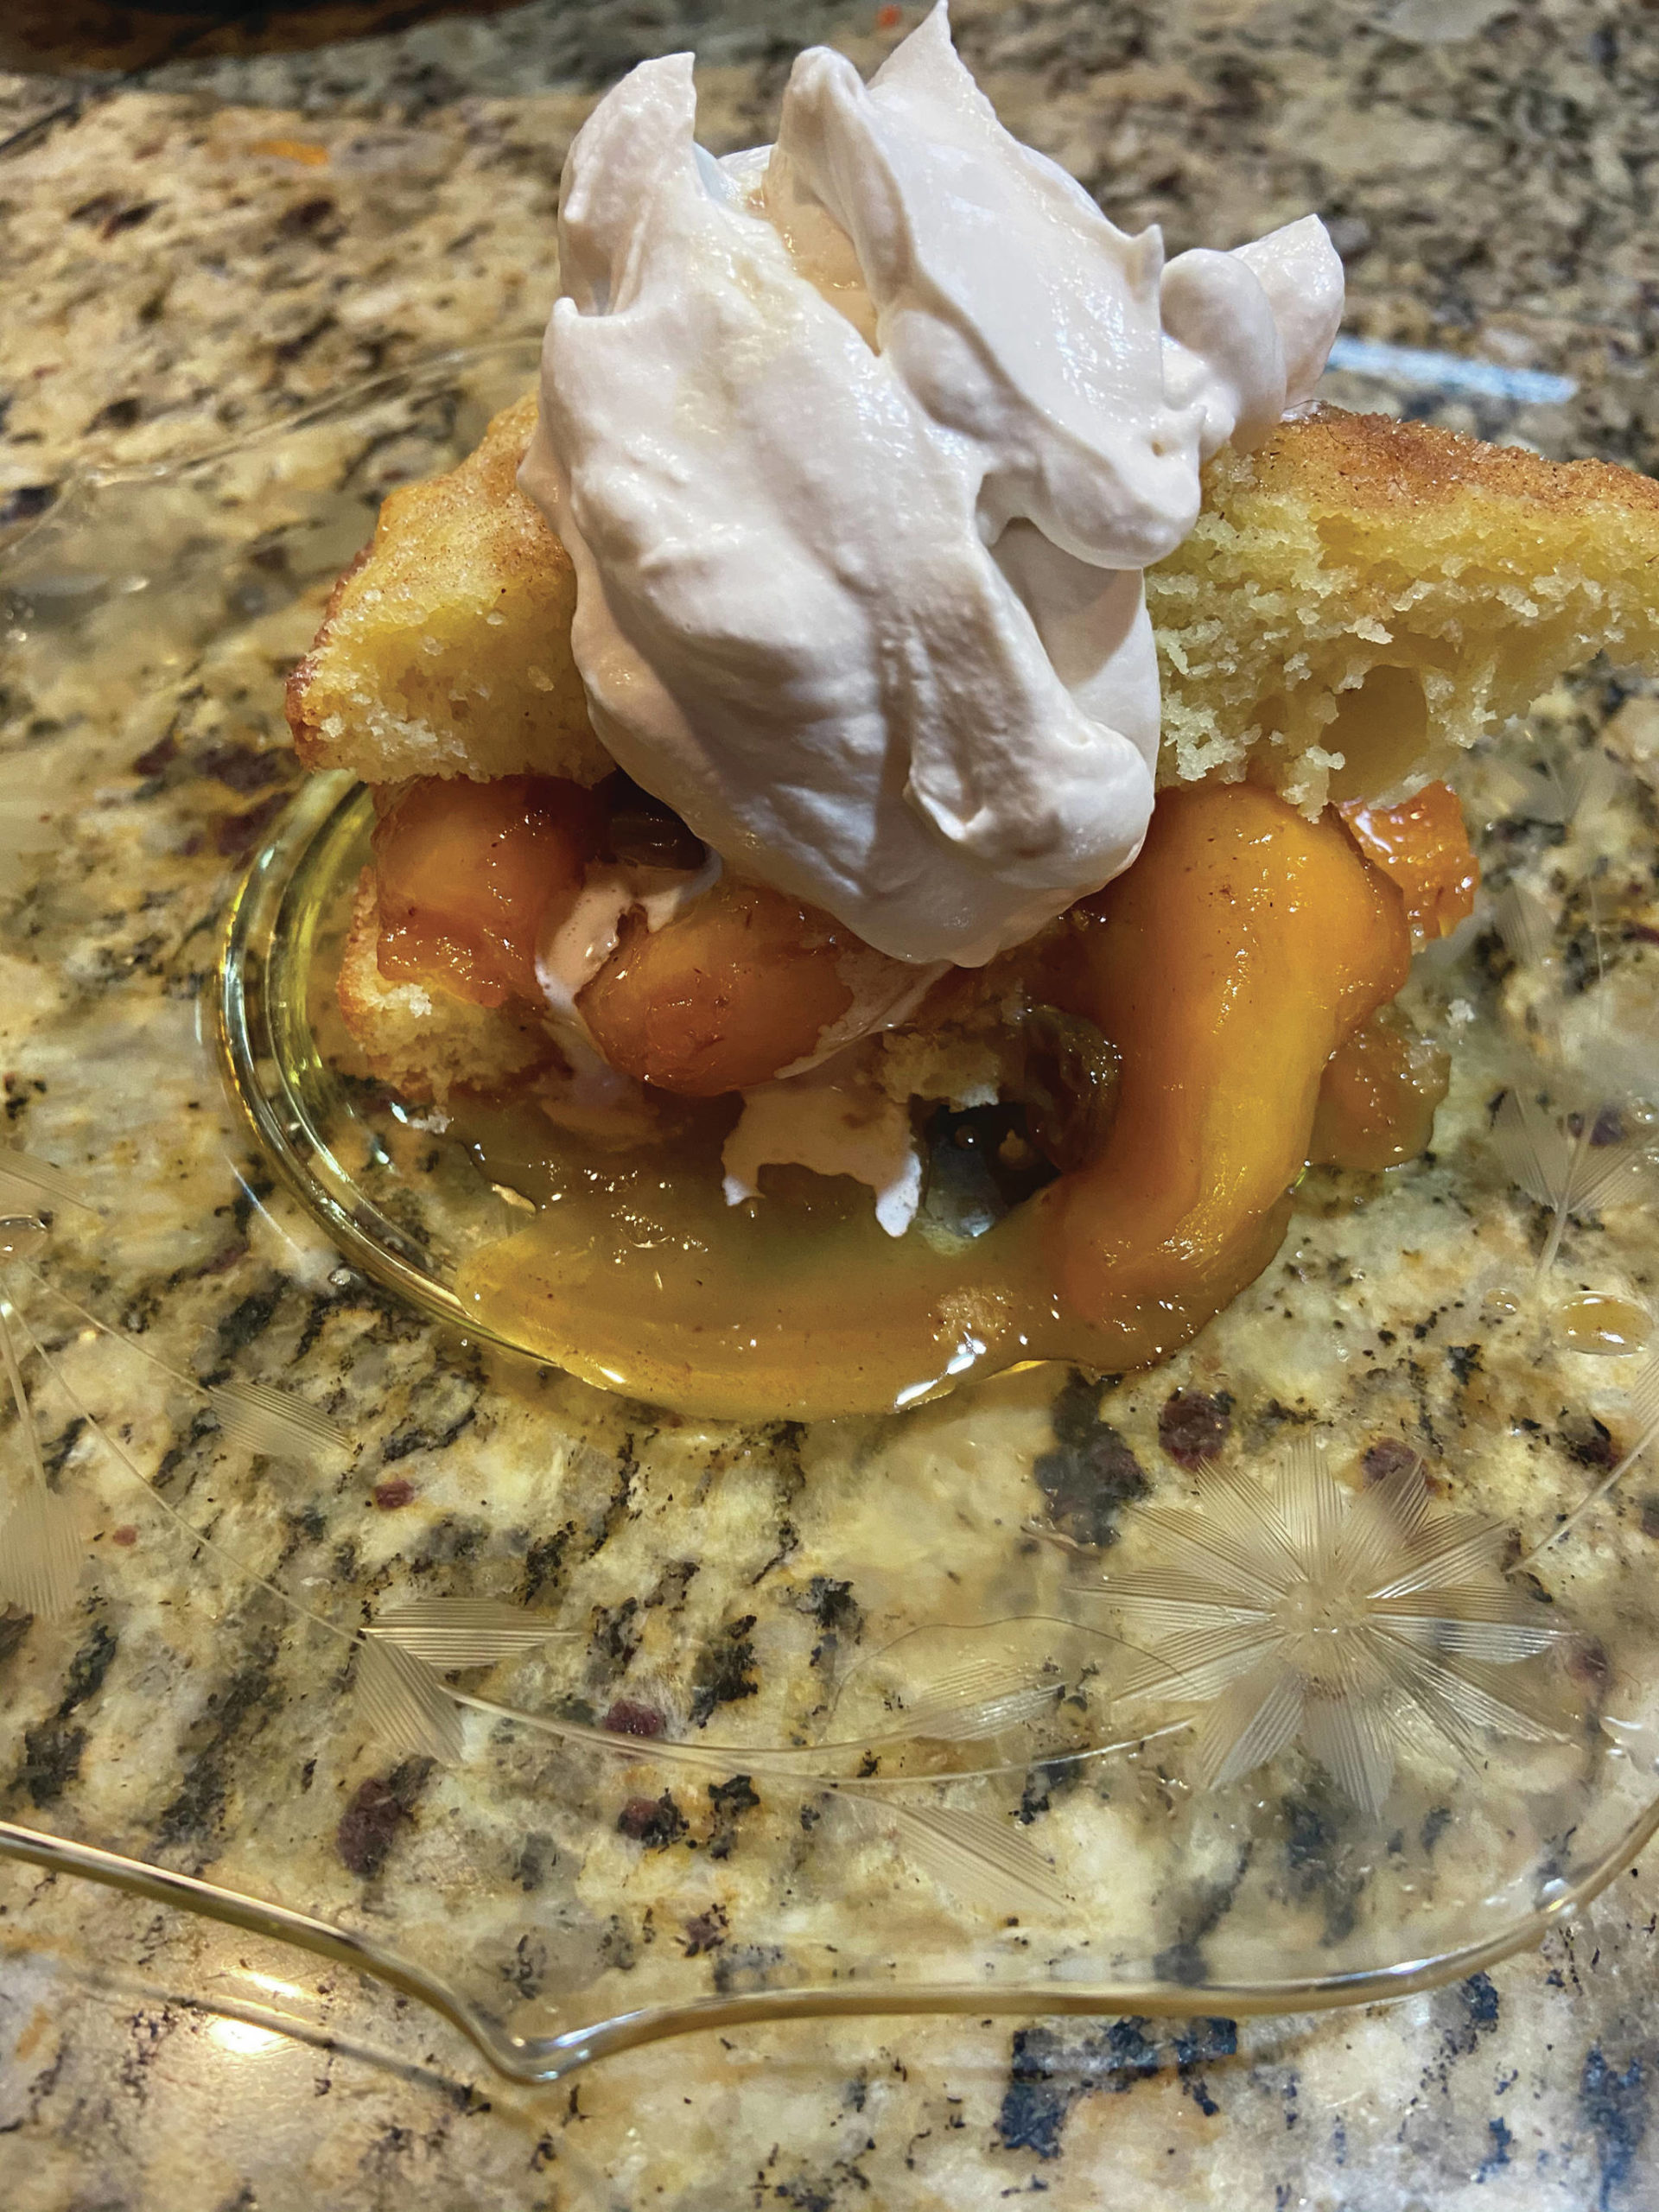 A generous dollop of whipped cream tops off peach cobbler, as seen here on Aug. 1, 2020, in Teri Robl’s Homer, Alaska, kitchen. (Photo by Teri Robl)